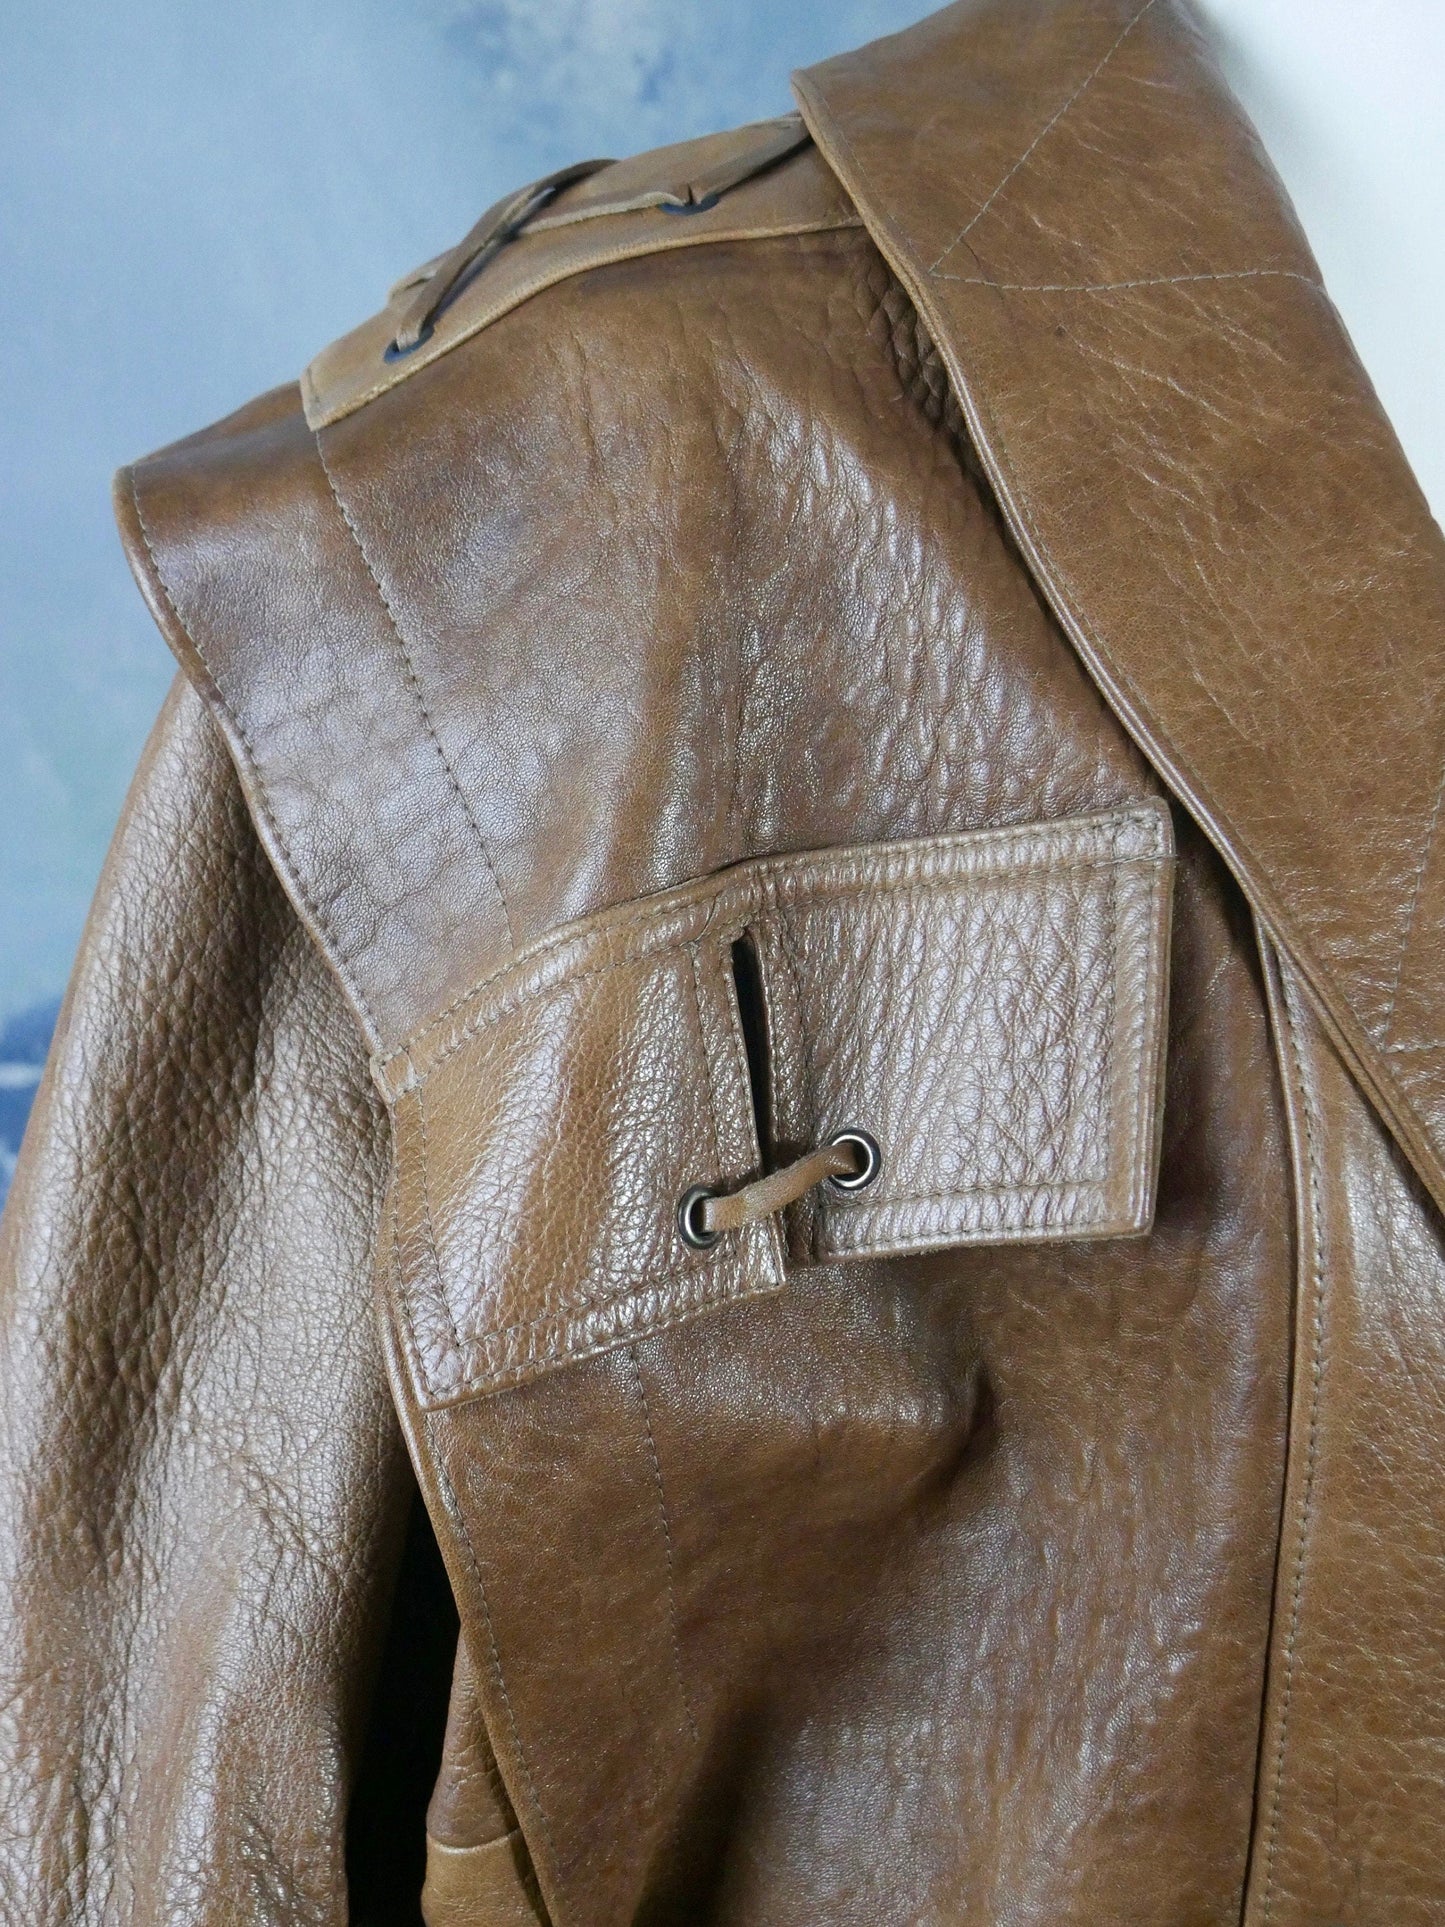 1980s Brown Vintage Faux Leather Jacket | European Vegan Double-Breasted Bomber Style |. Large Leo Gabor Vintage